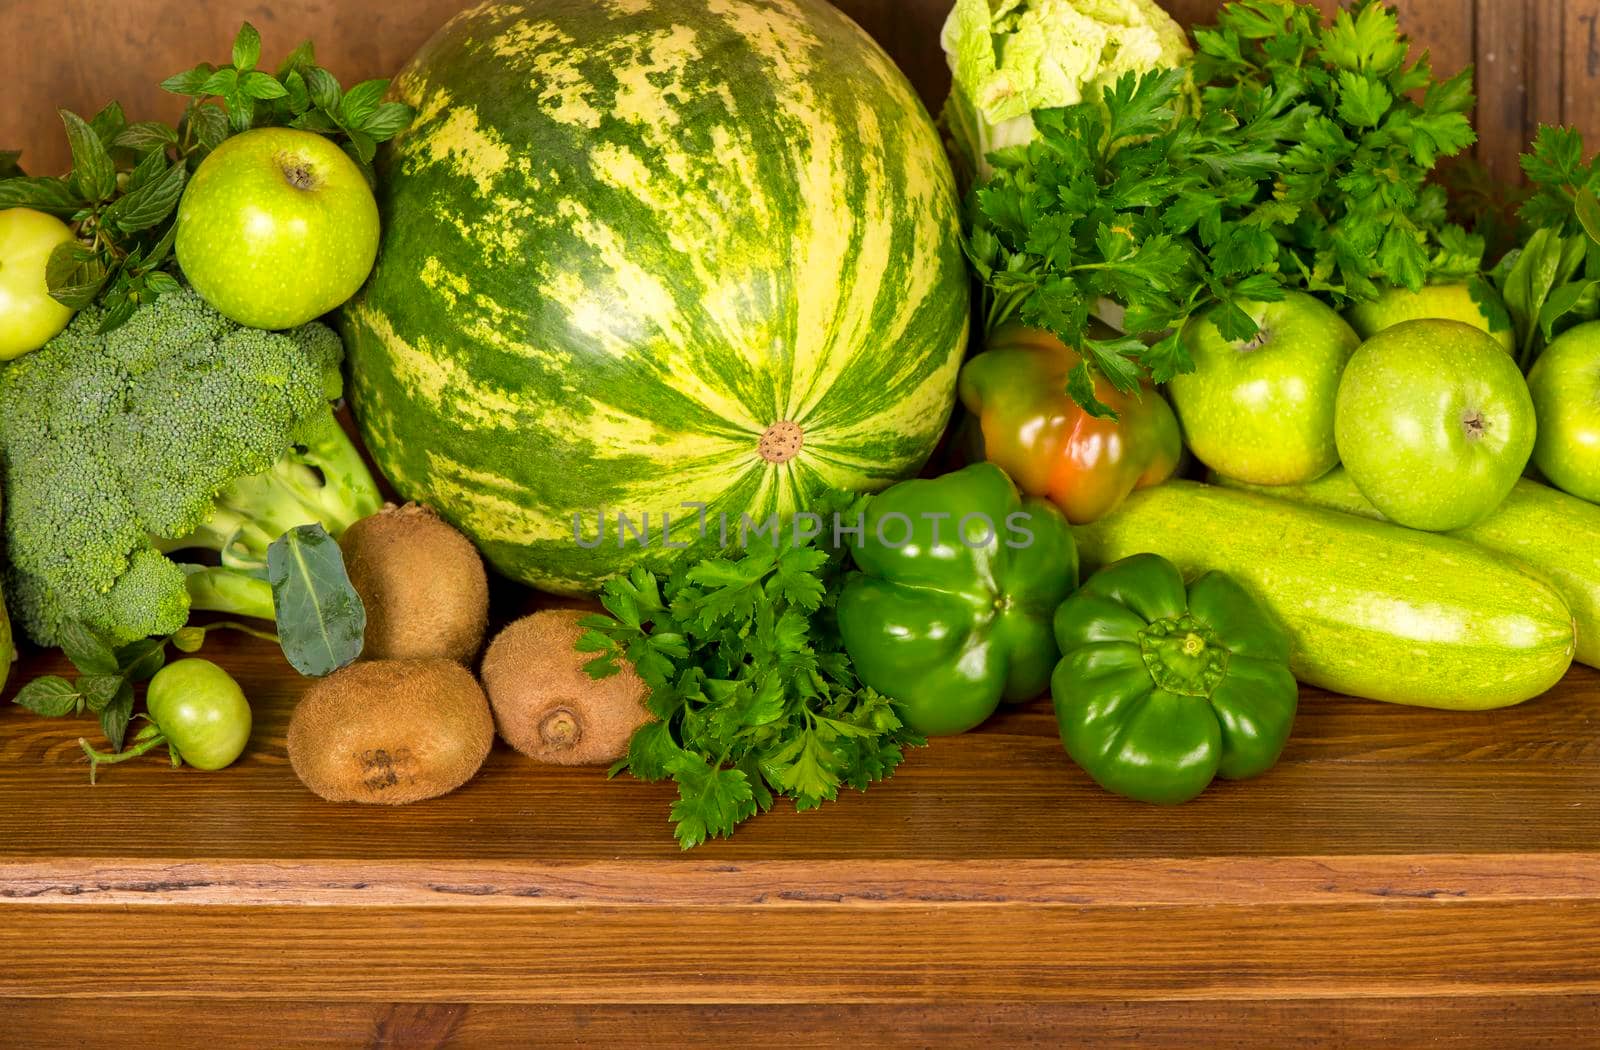 Useful green vegetables on a wooden background. by aprilphoto